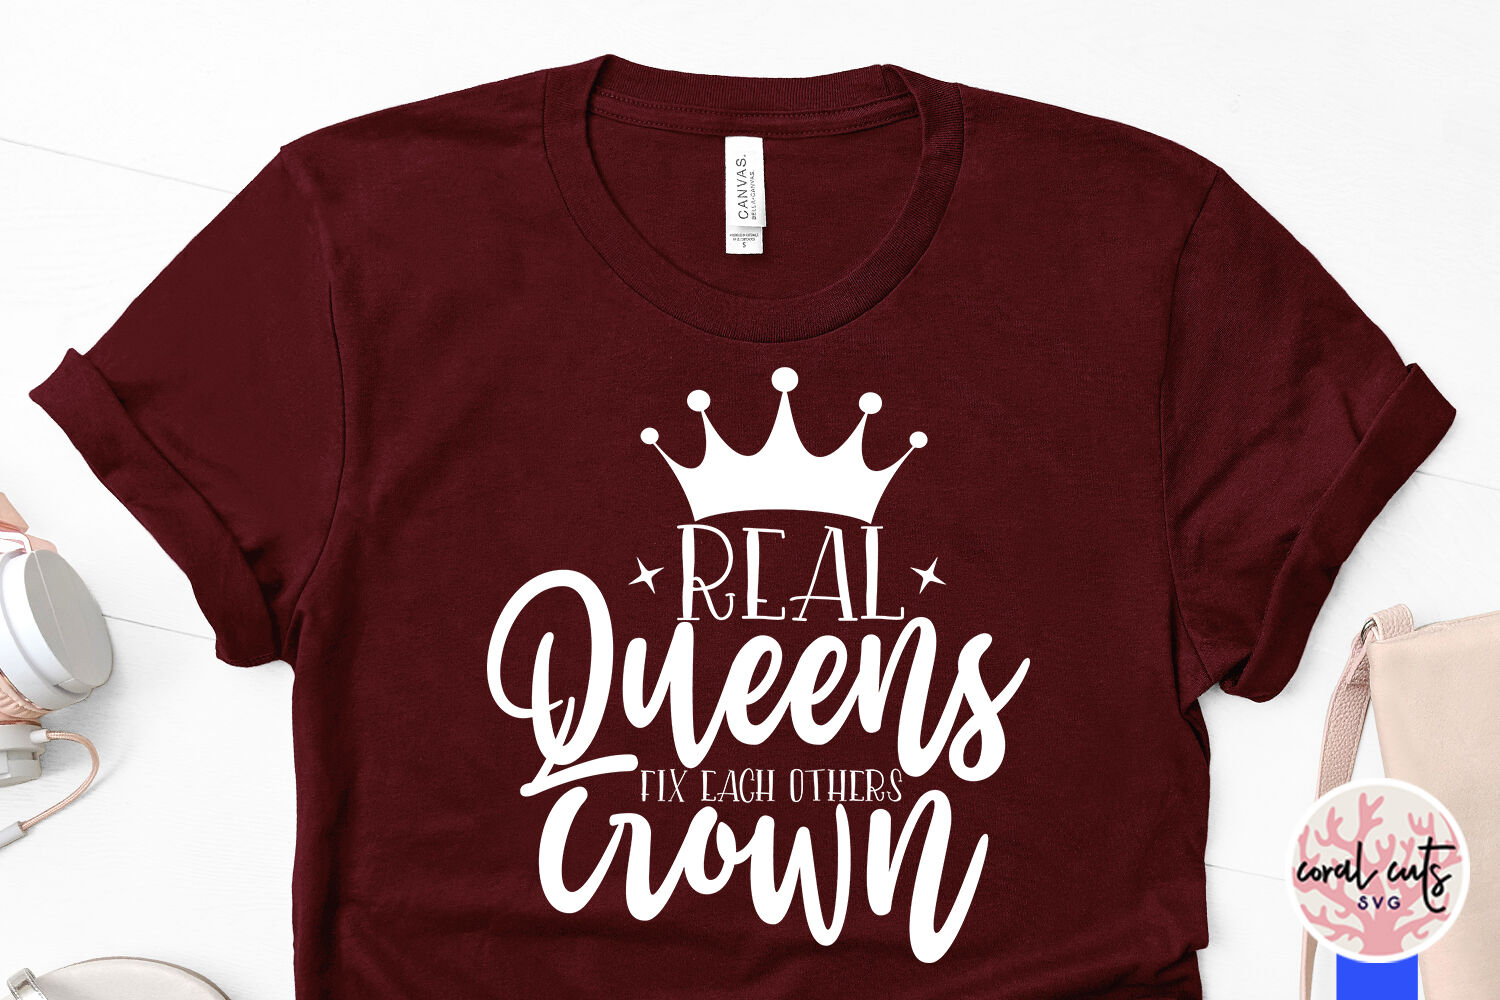 Real queens fix each others crown - Women Empowerment SVG ...